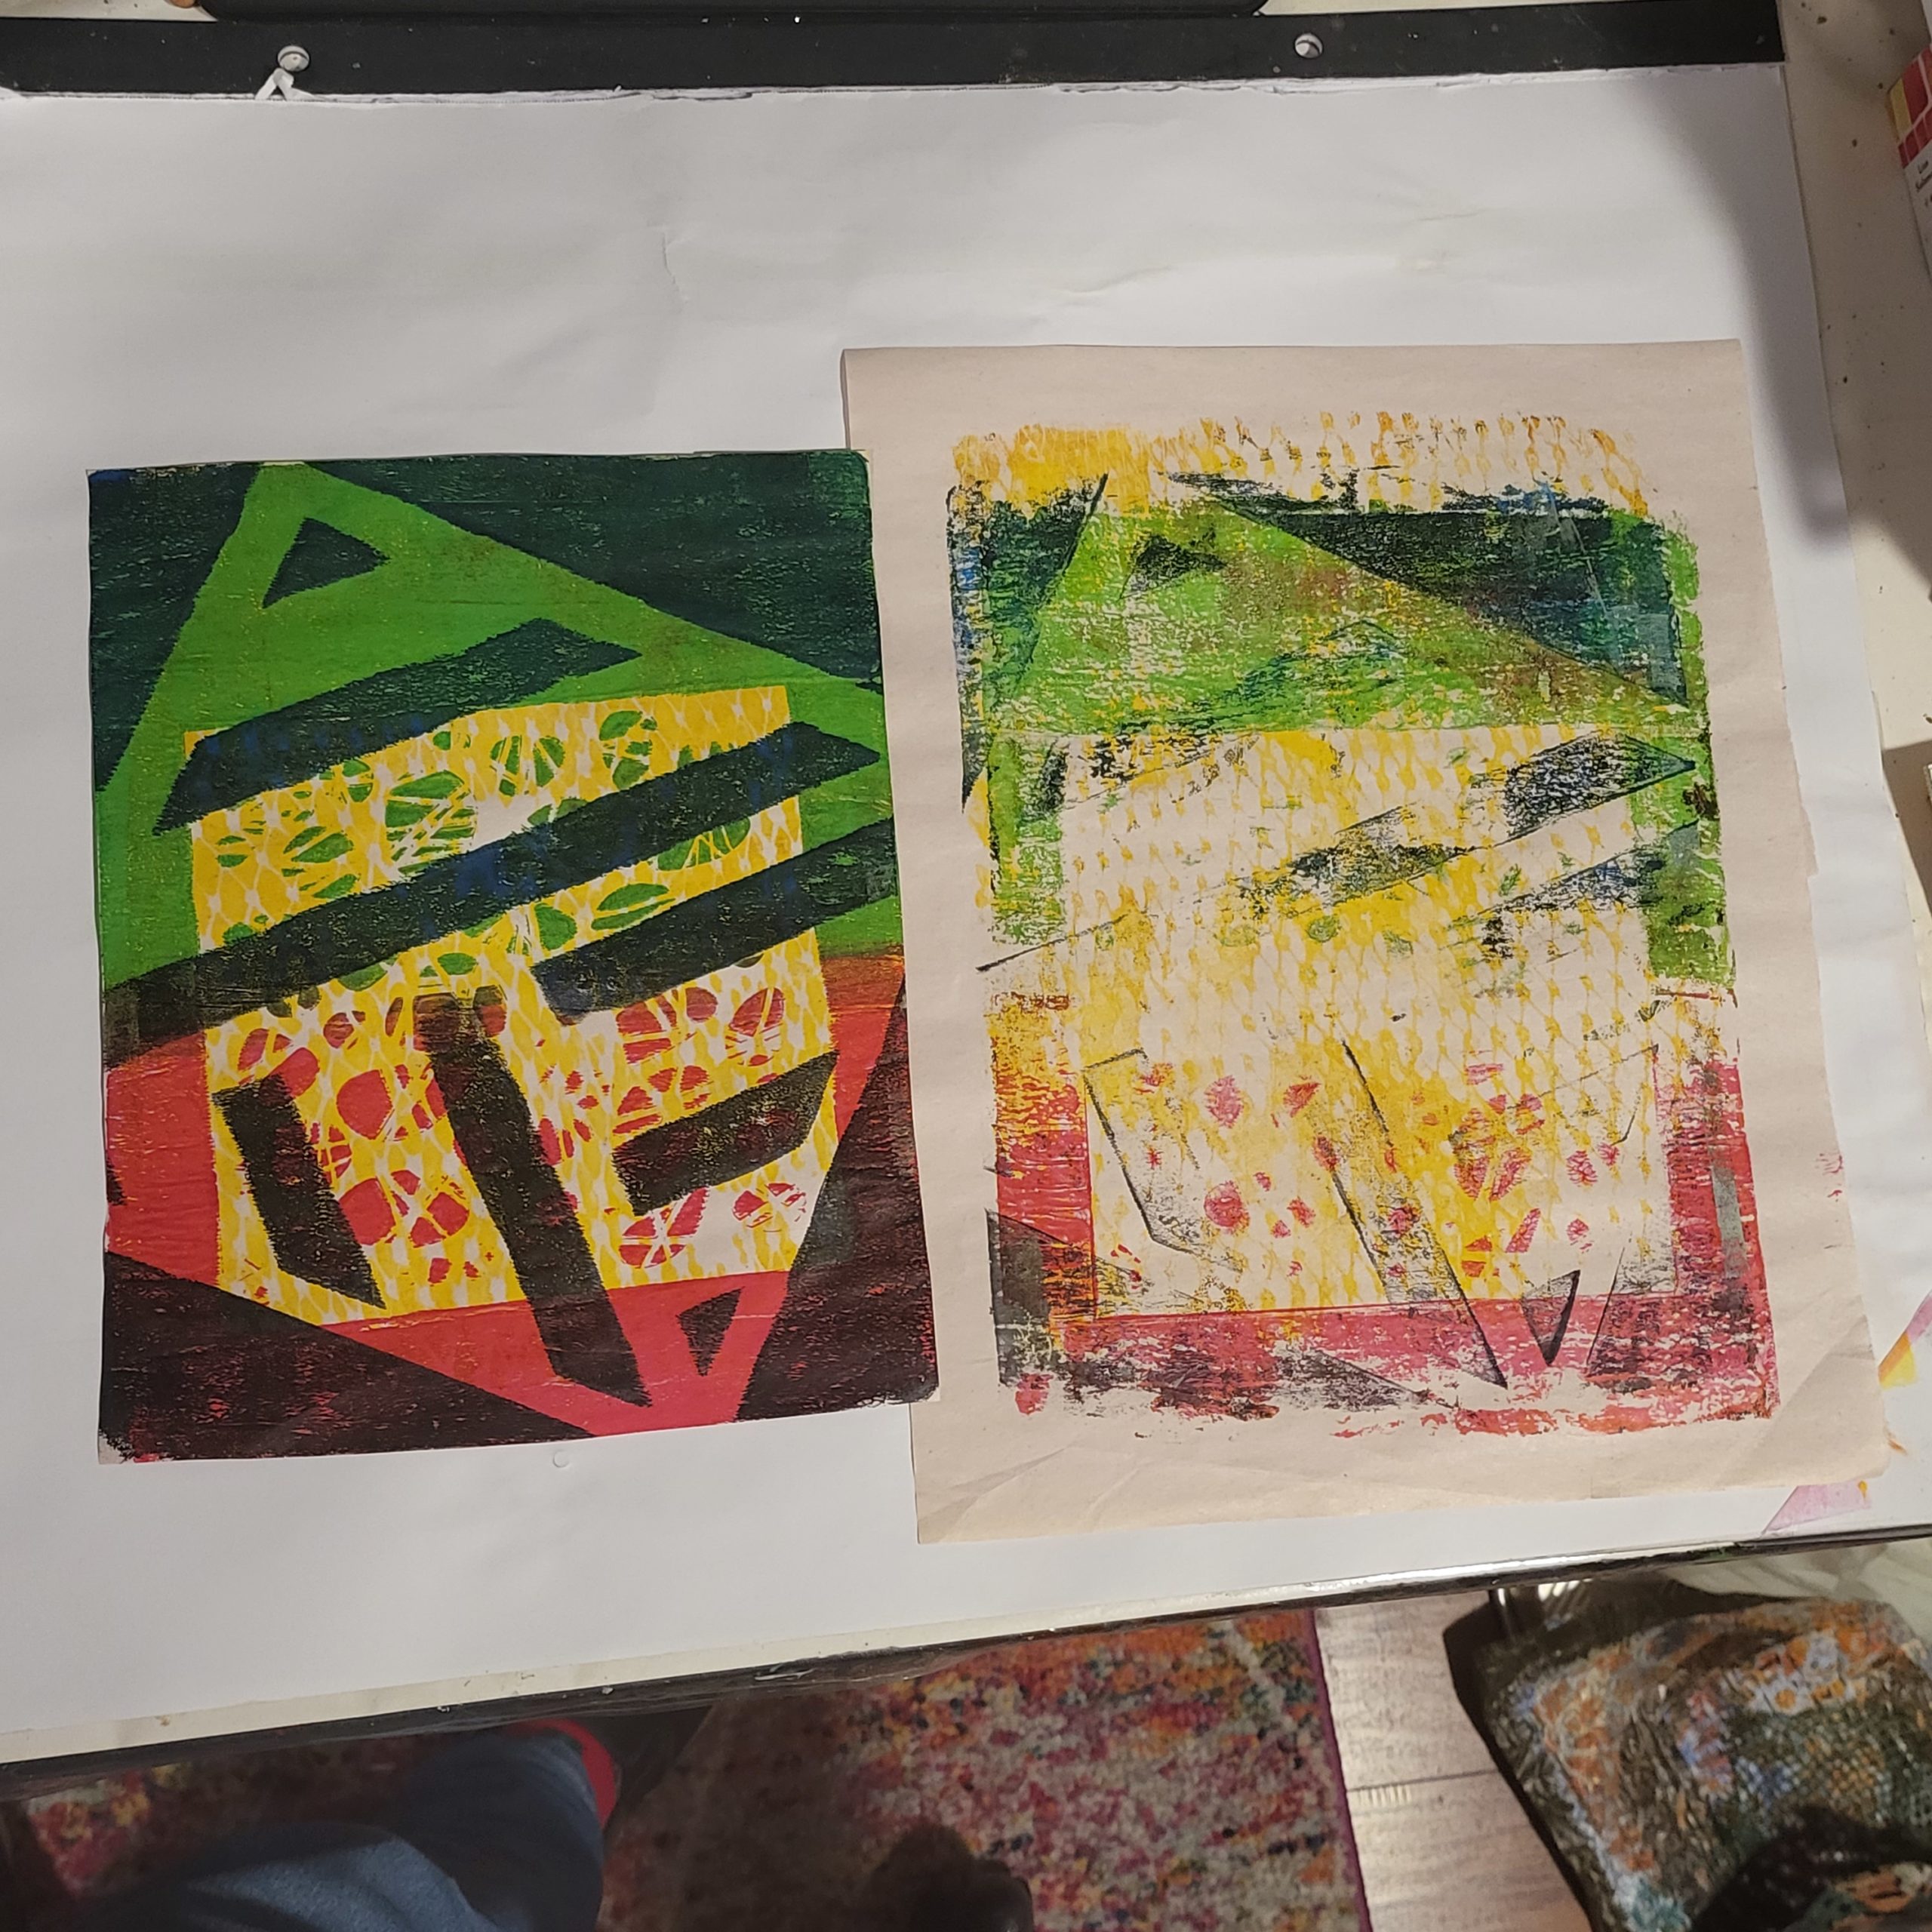 This image has 2 monoprints in it - the monoprint on the right is a mess of layers that did not work out - 2 stencils and netting, with no background so a lot of the original paper is showing through. The monoprint on the left has a yellow mask of a stencil, on a green and red background, with another stencil layered on top in black. Experiments help us determine what works and what does not, so that we can produce what we want to.